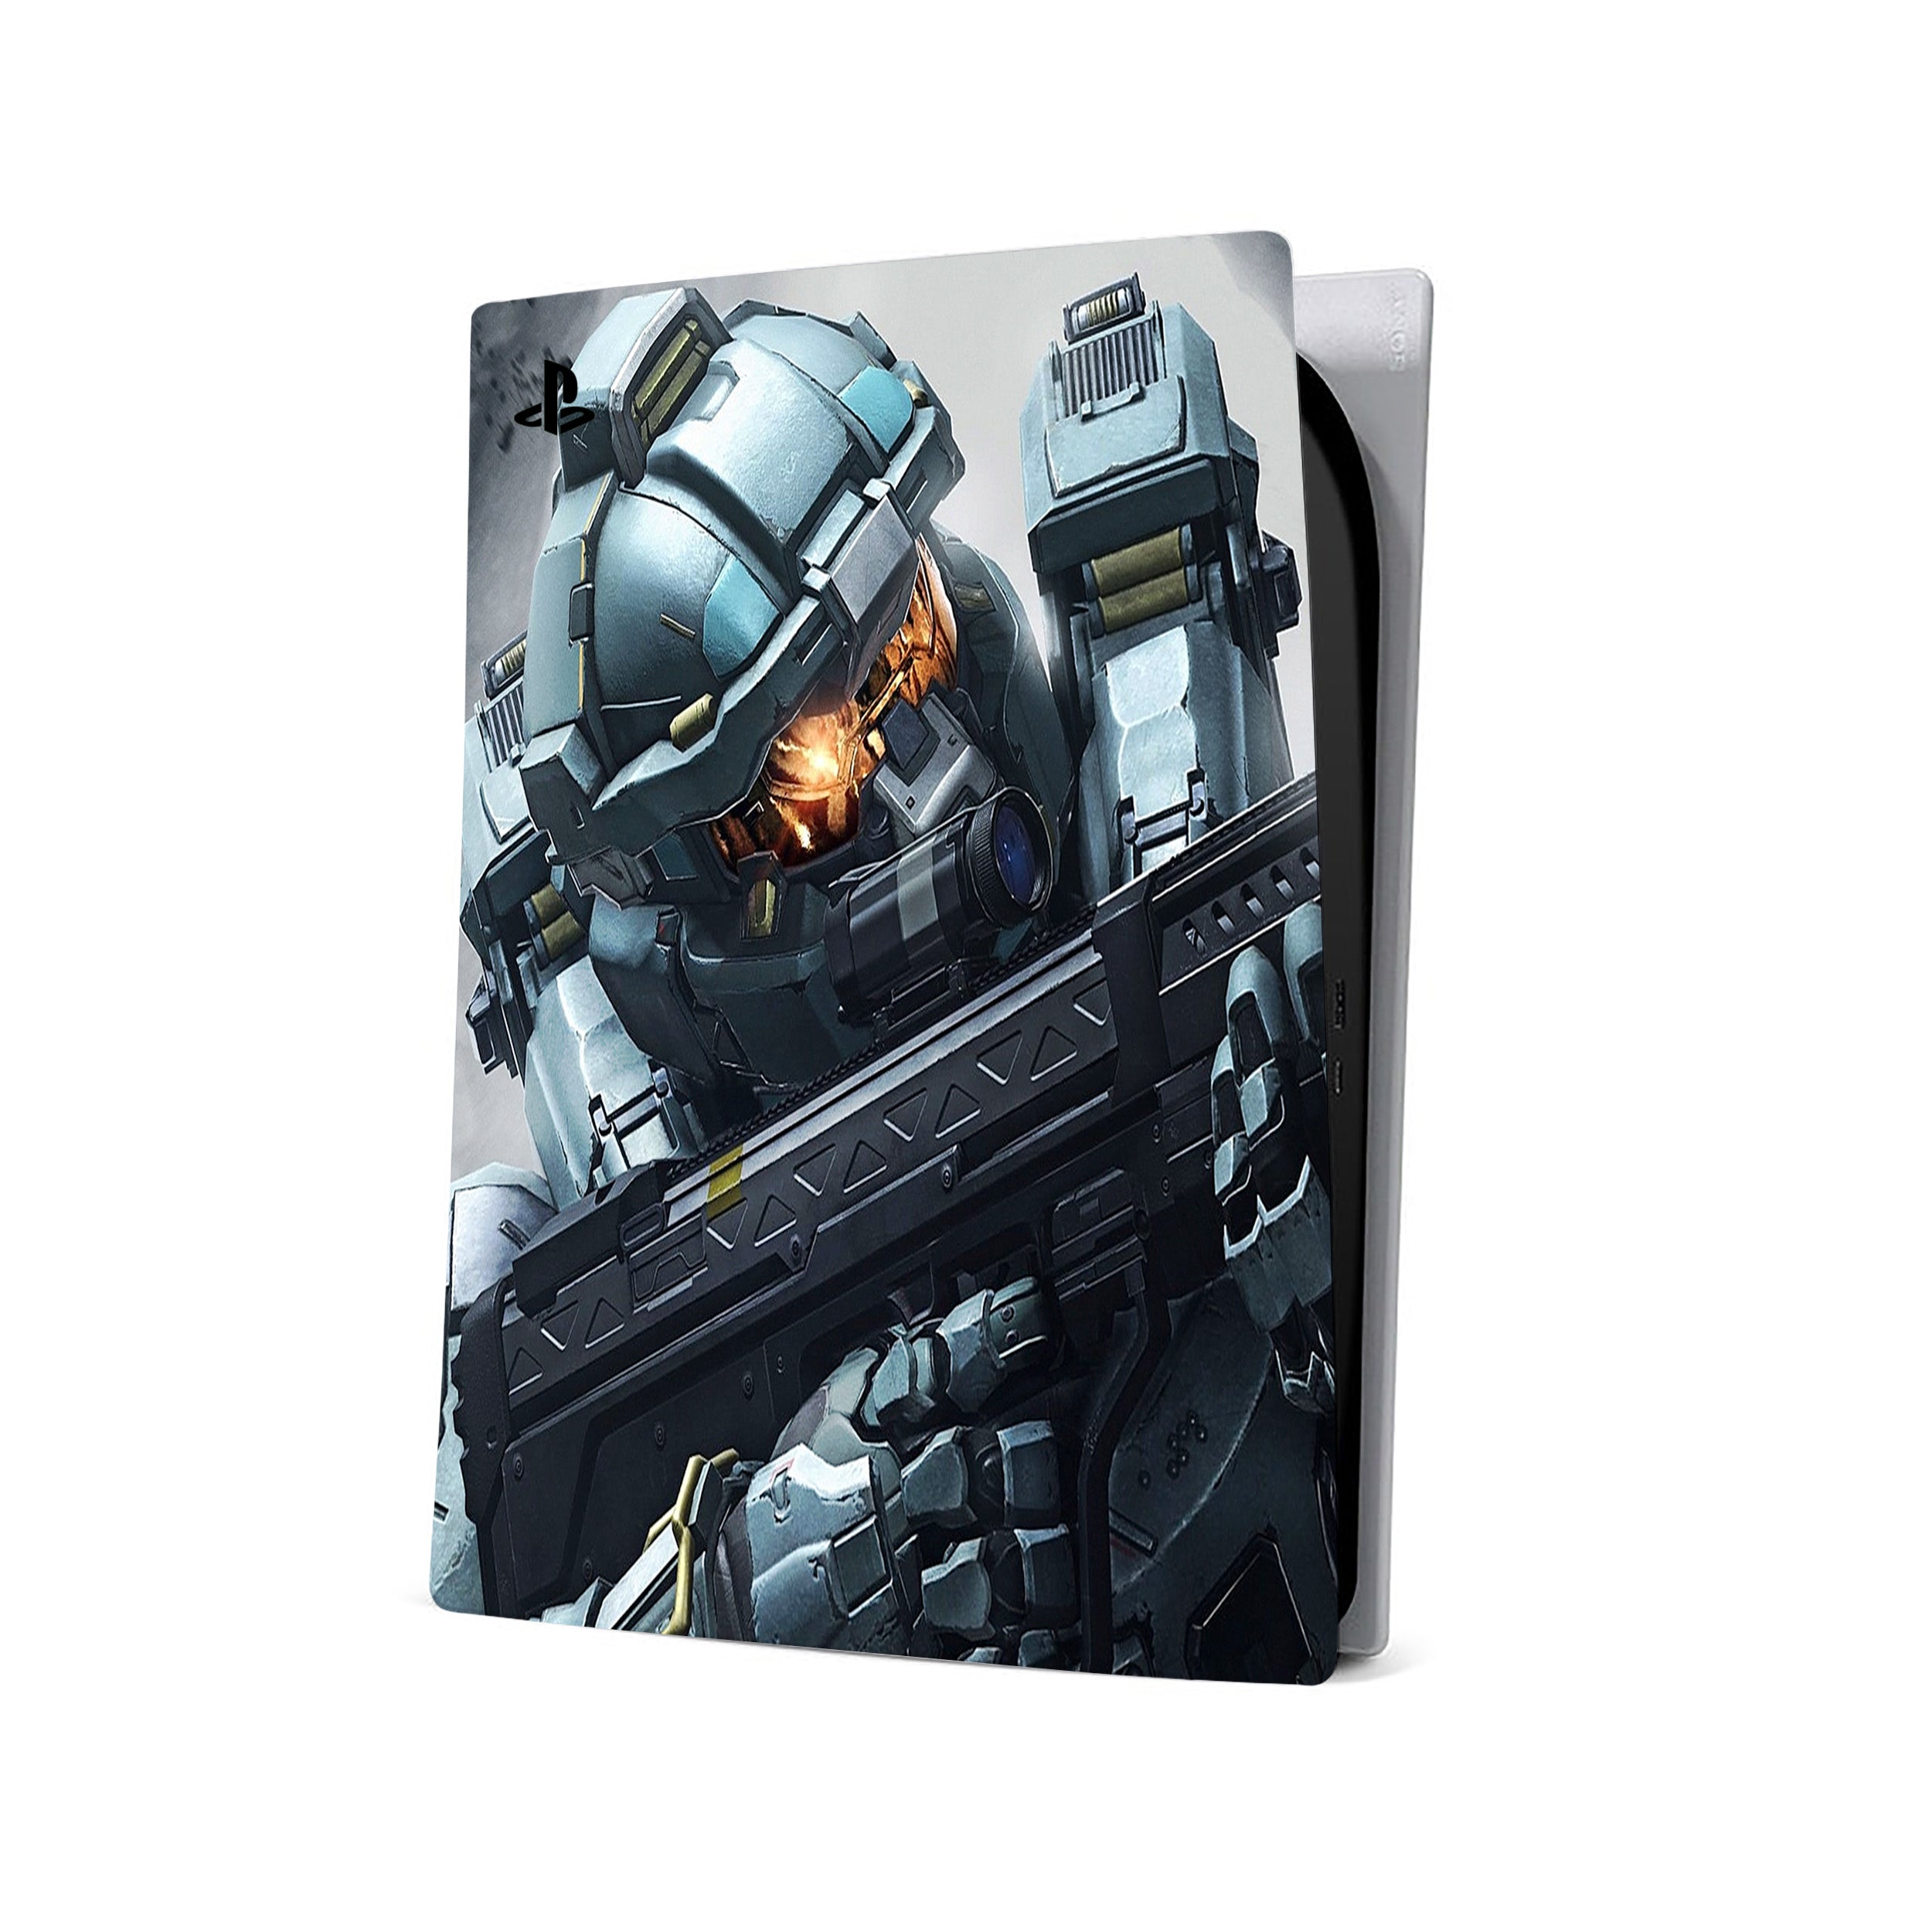 A video game skin featuring a Halo design for the PS5.